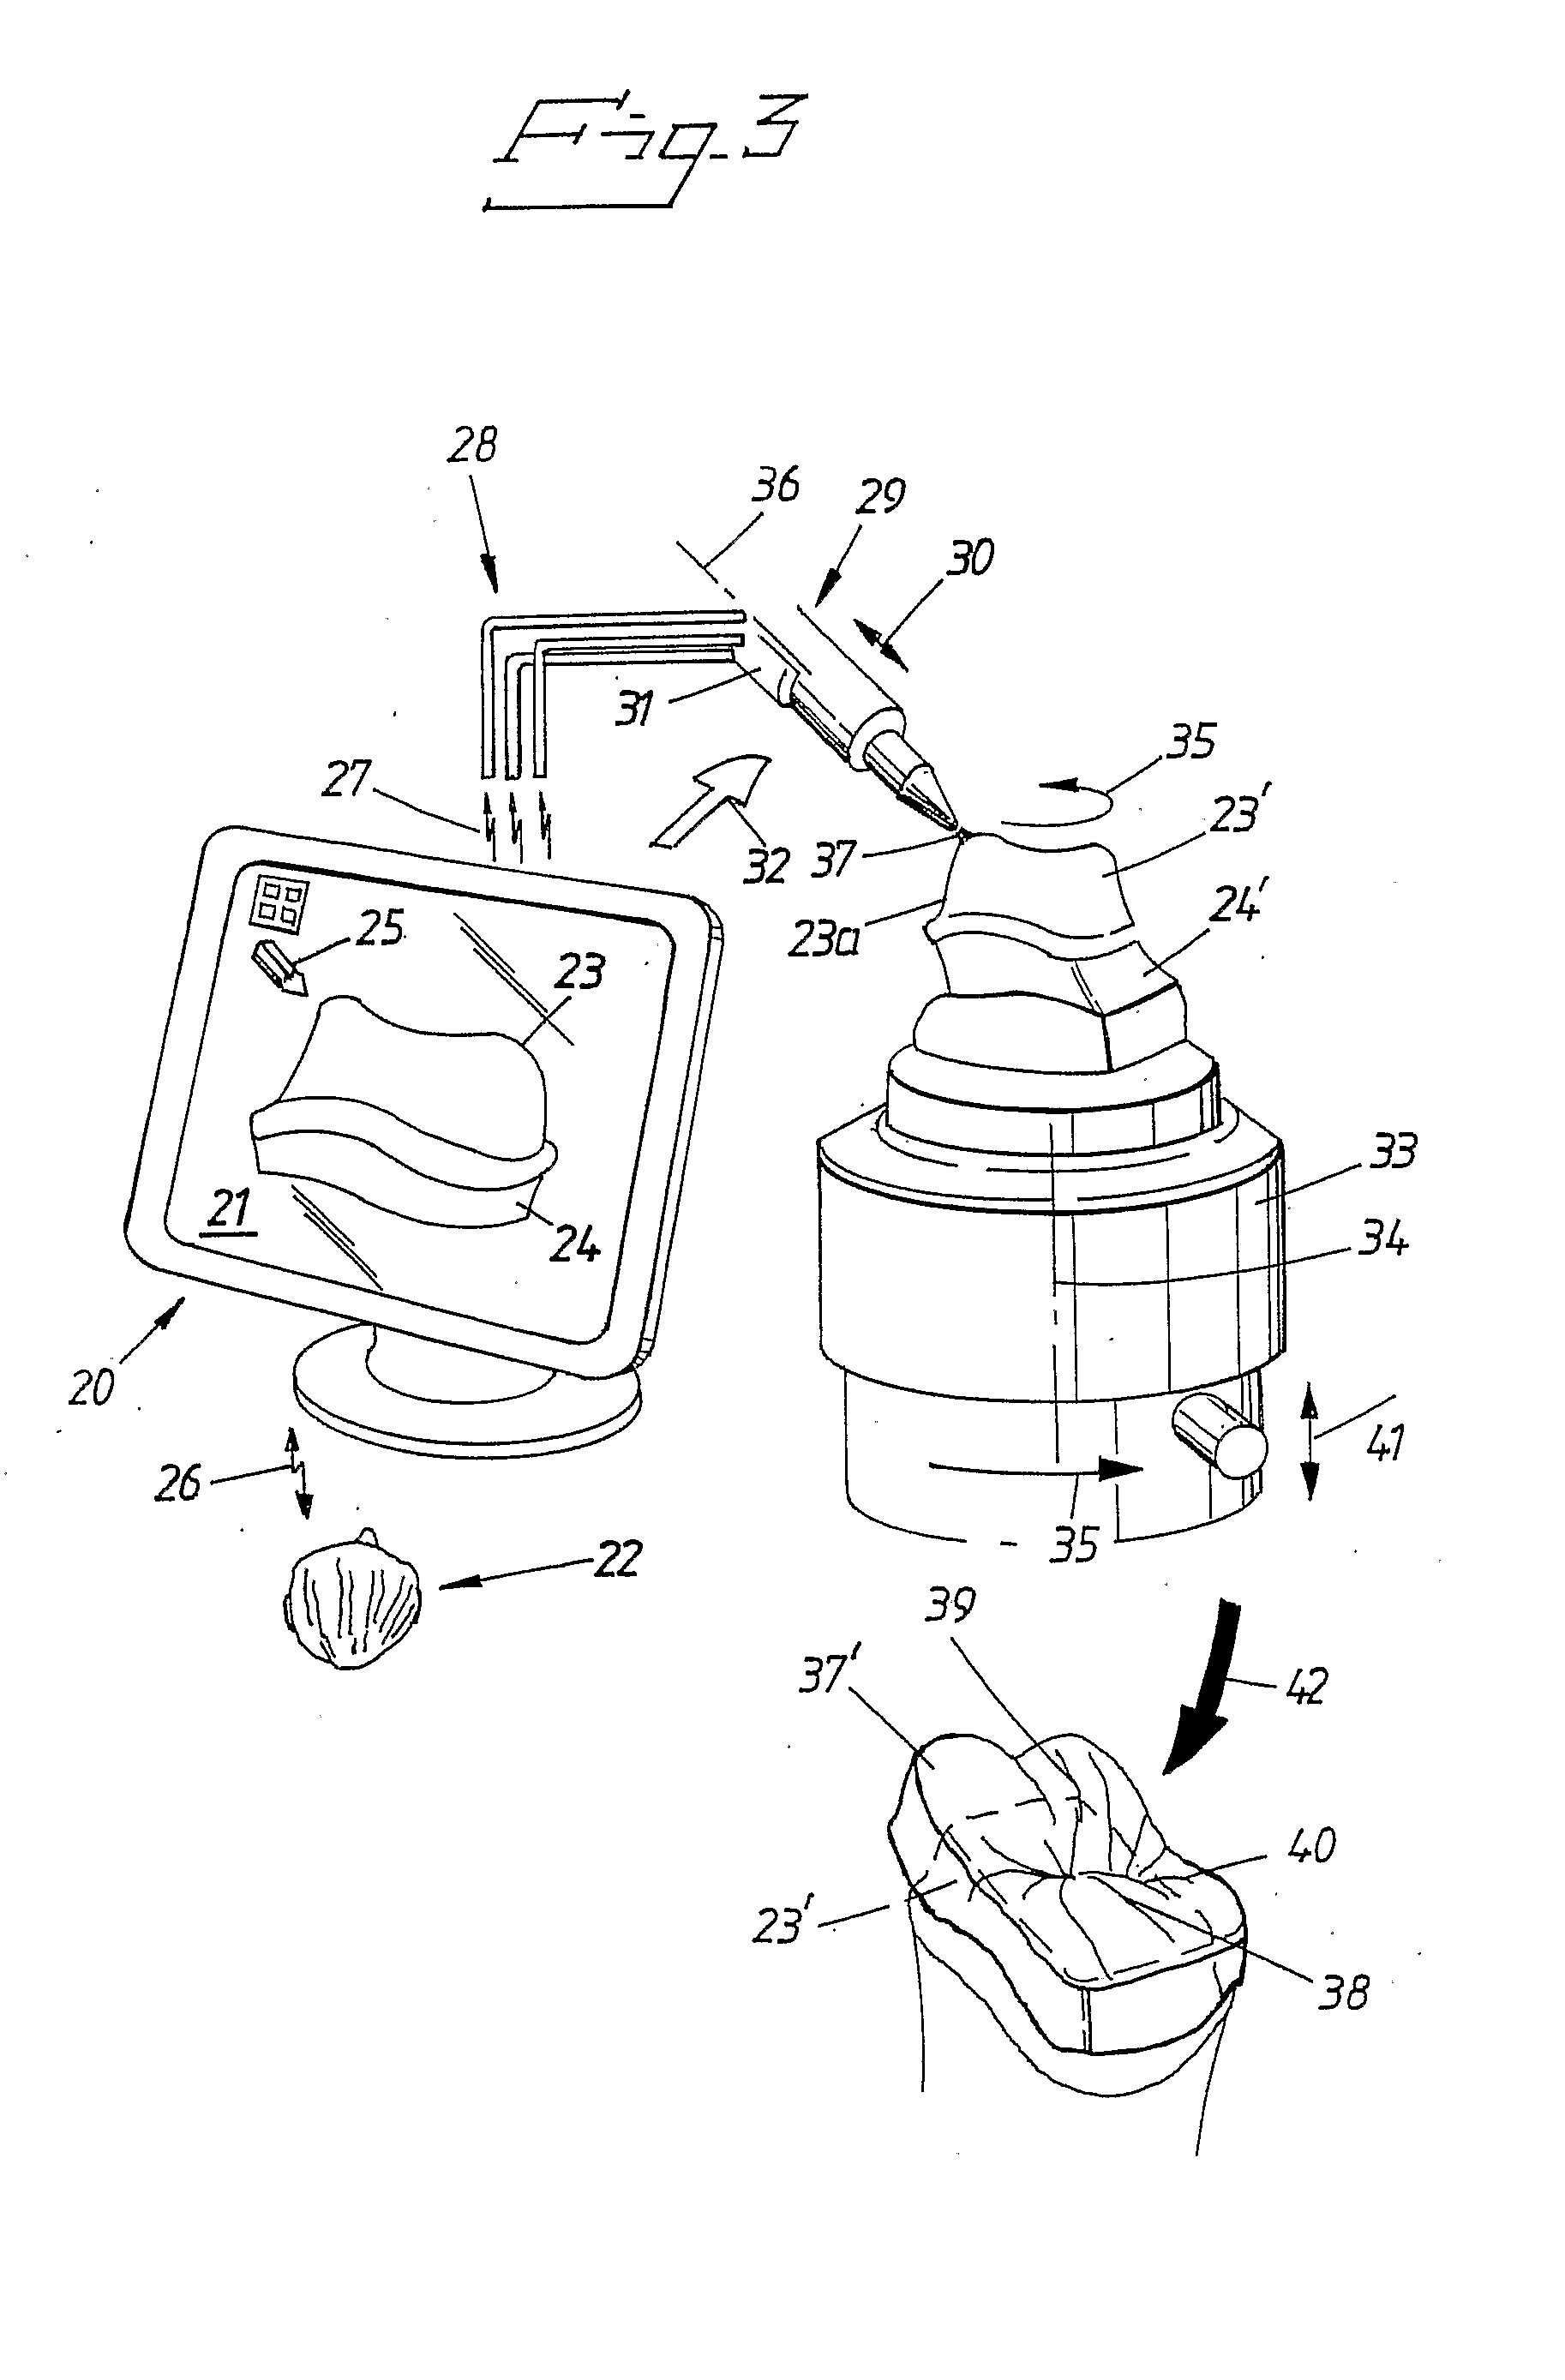 Method and System for Coloring or Tinting a Prosthesis, and Such a Prosthesis